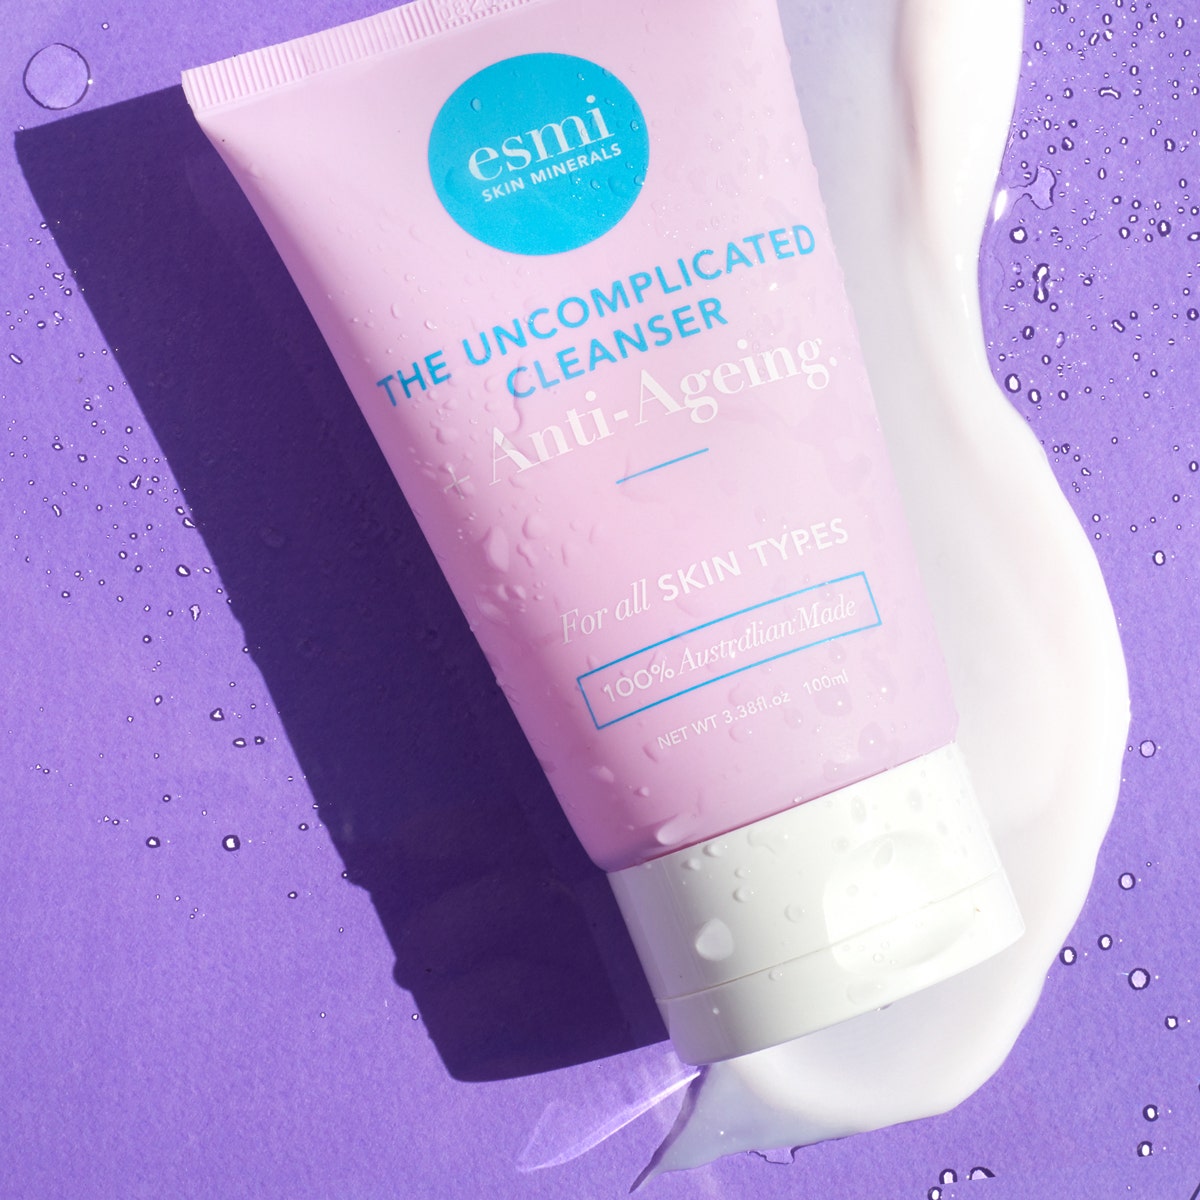 The Uncomplicated Cleanser plus Anti-Ageing 100ml